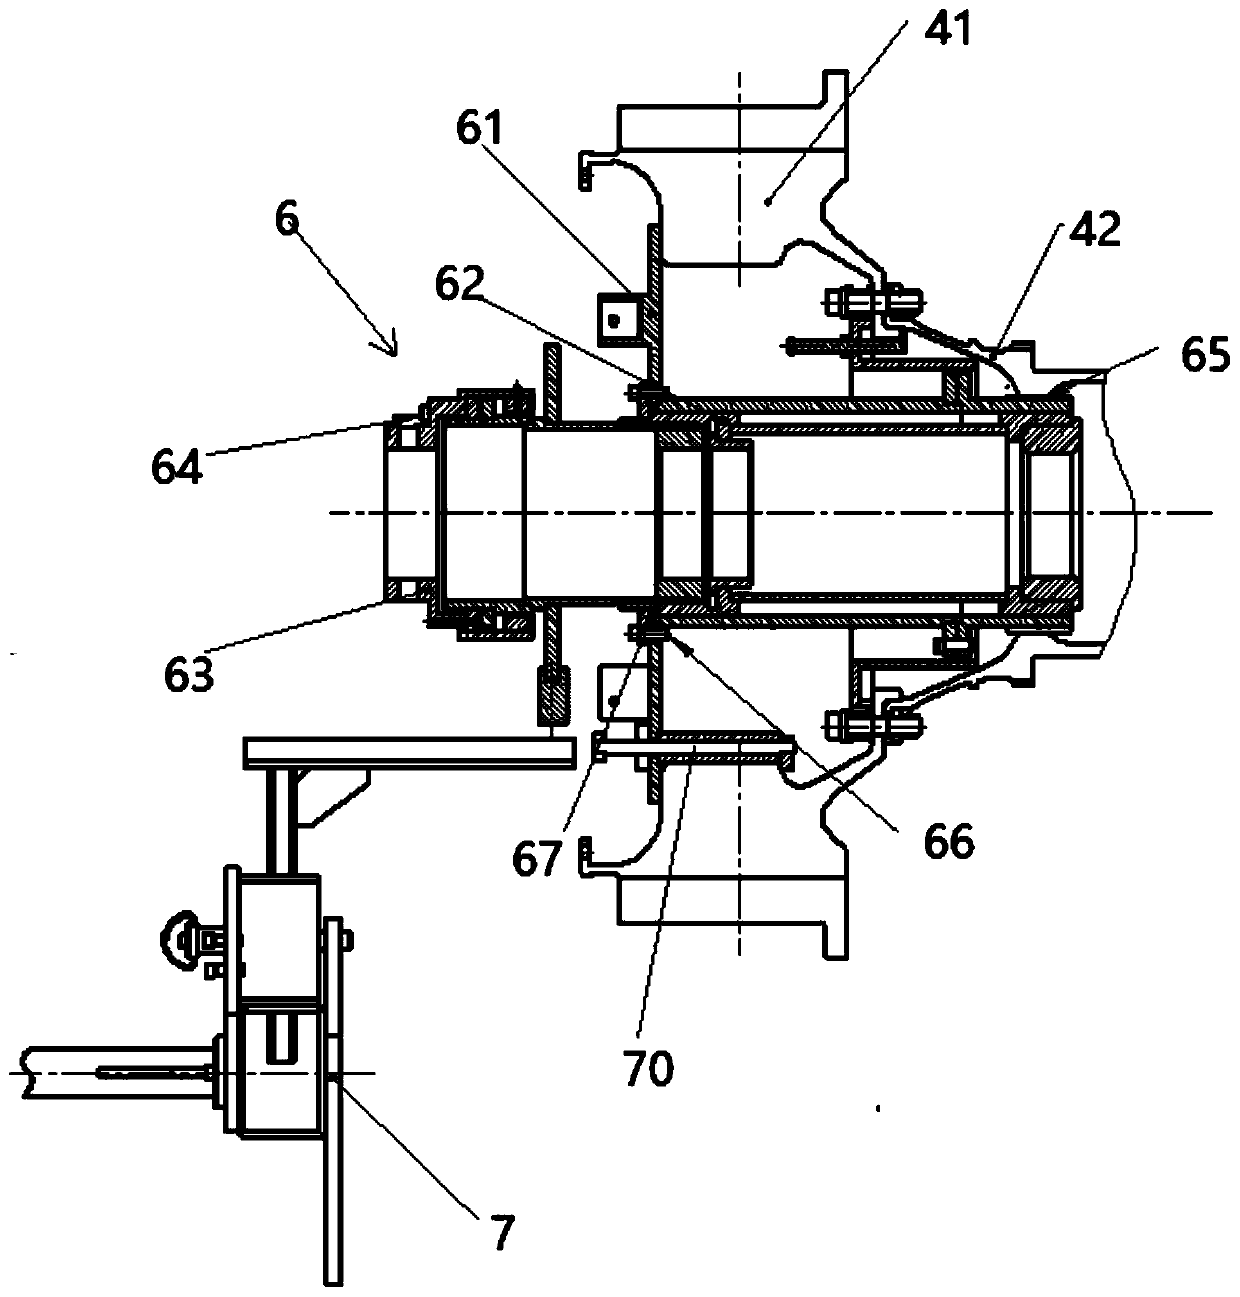 Traction tool for low-pressure turbine of engine